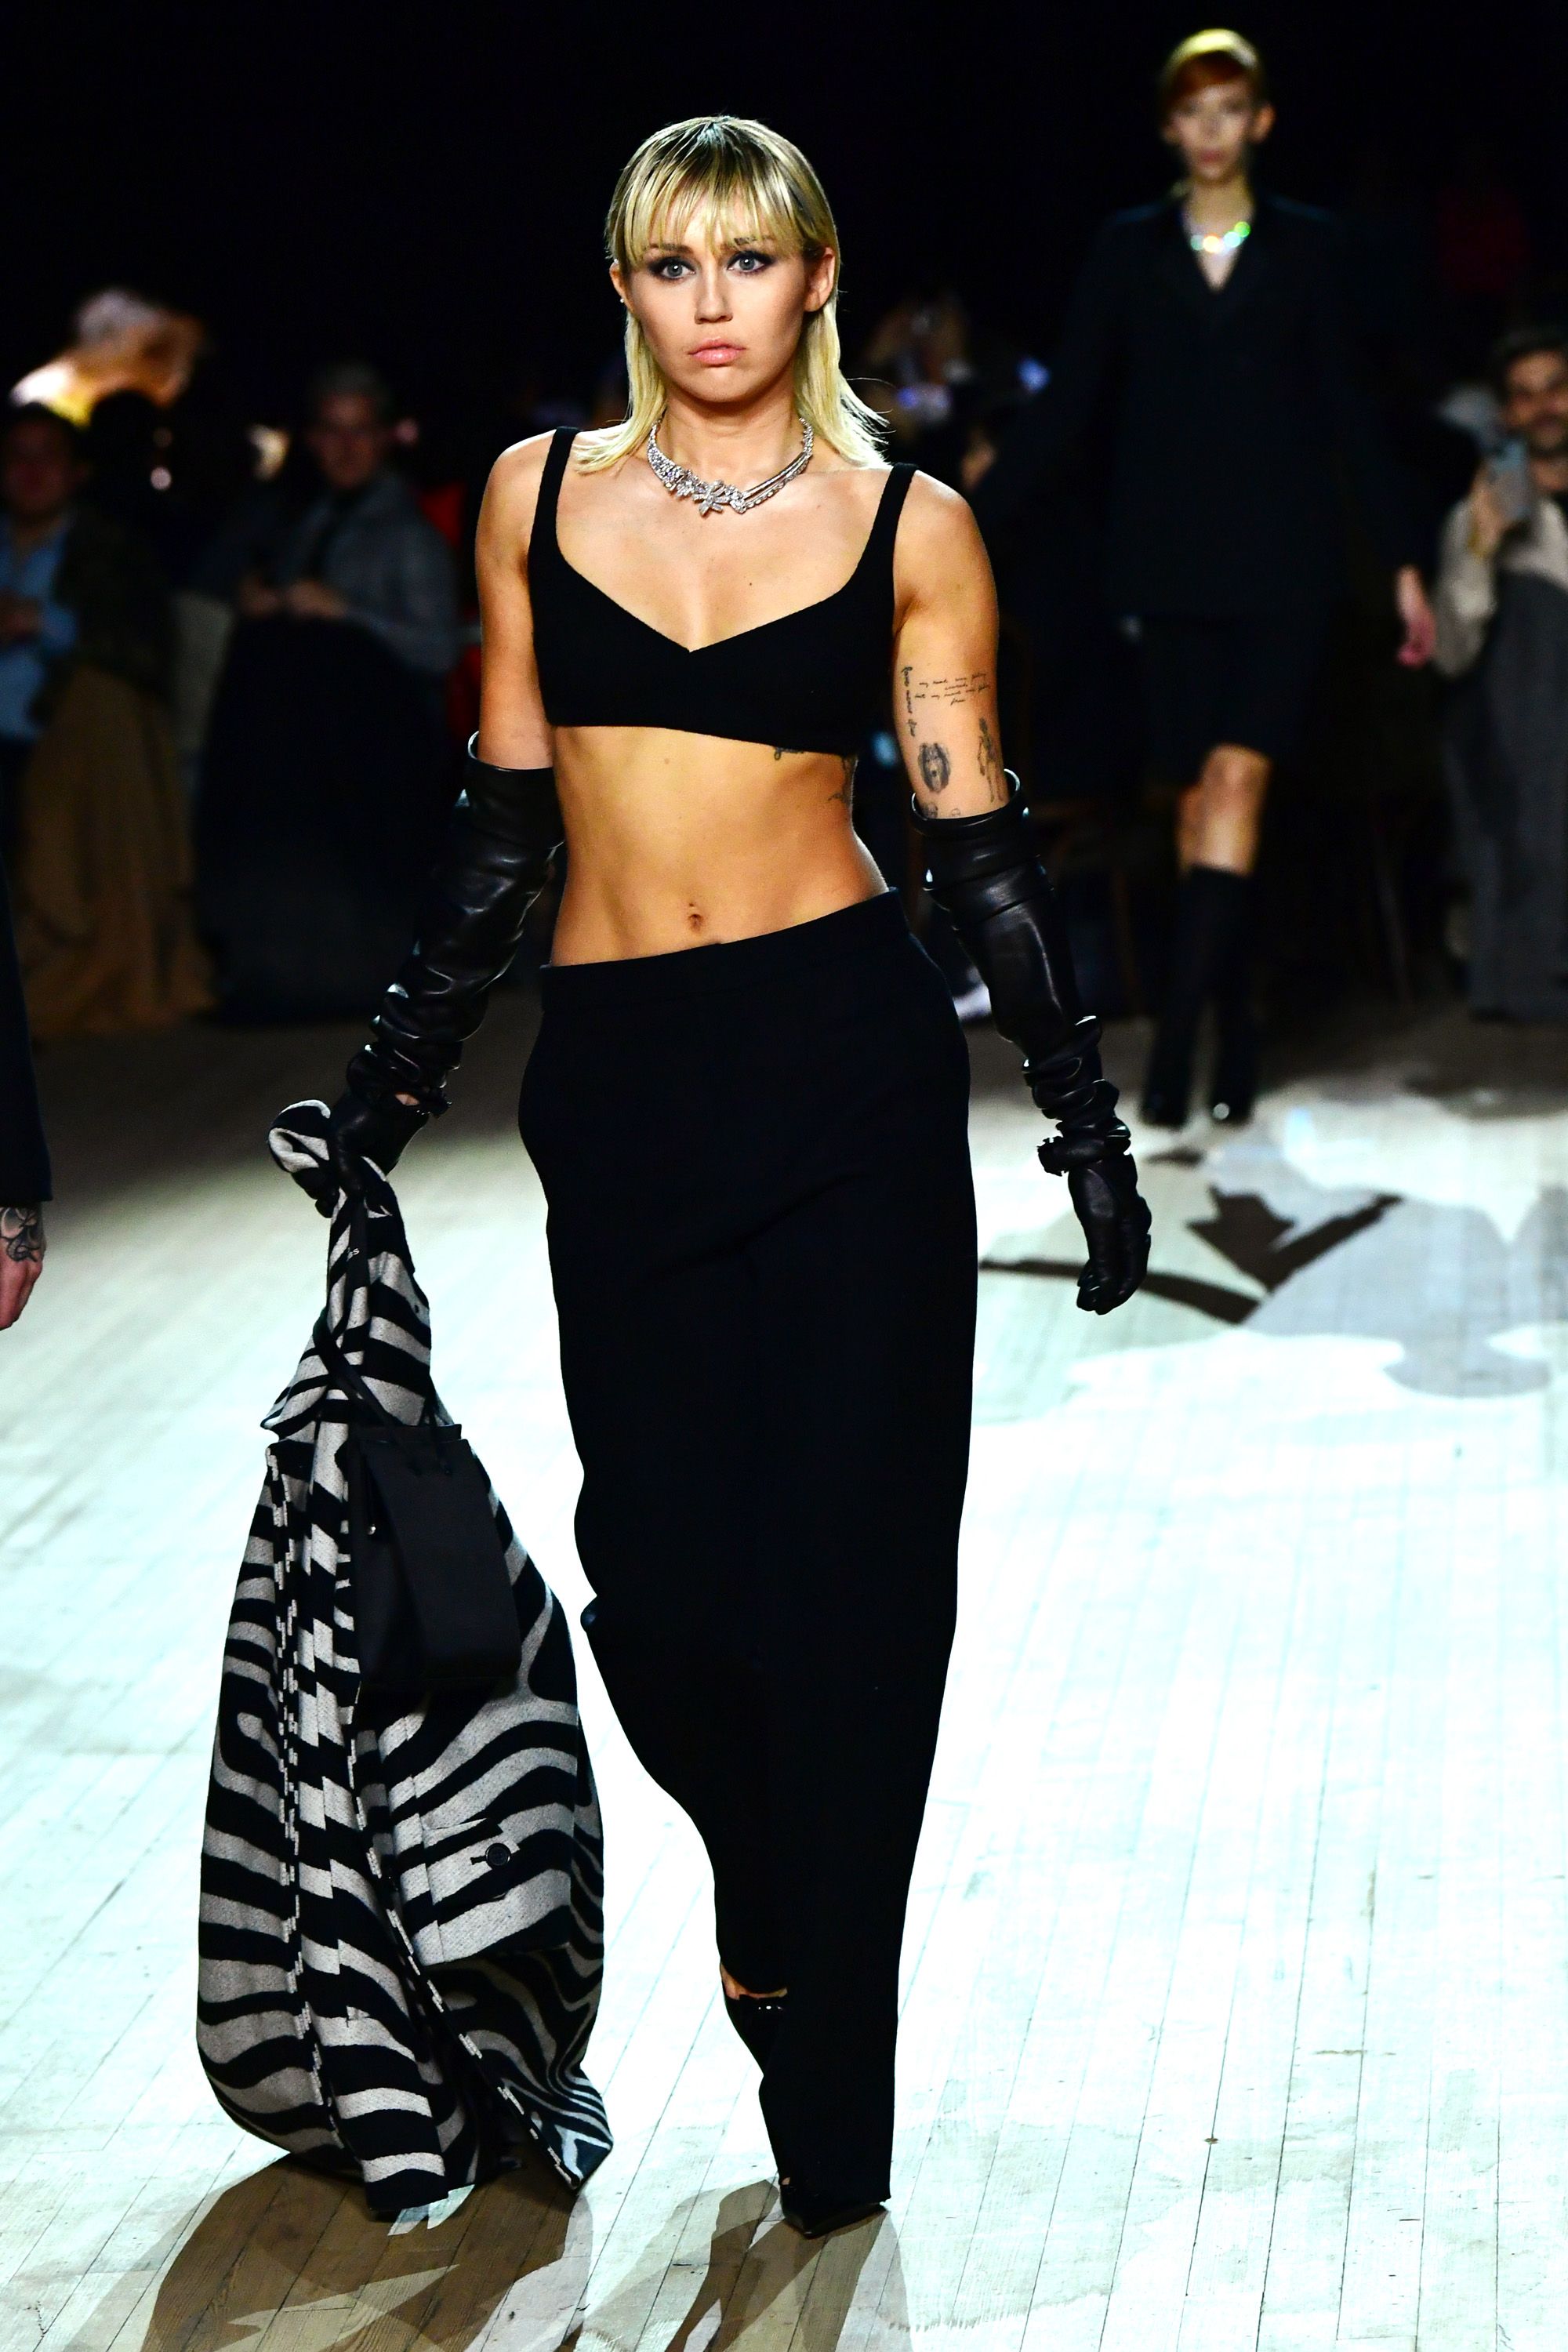 Miley Cyrus (and her abs) bring New York Fashion Week to a close